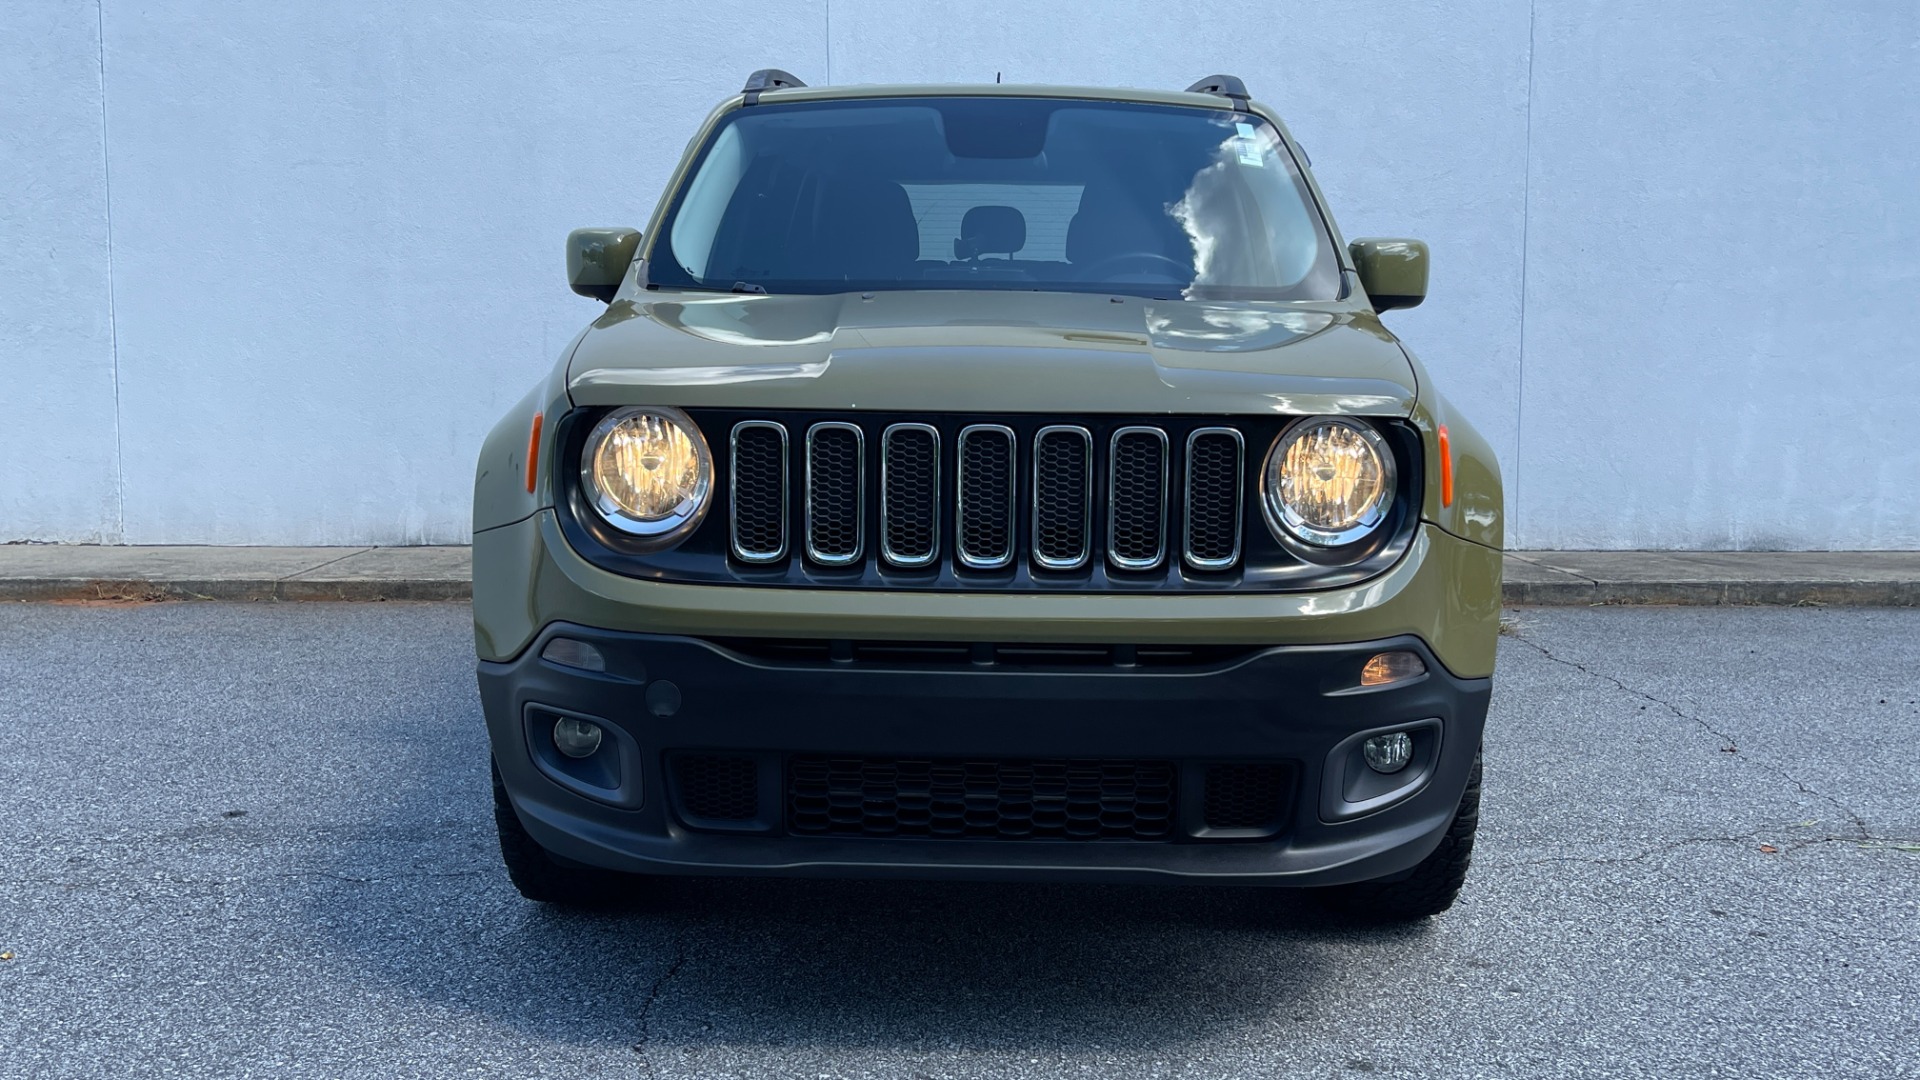 Used 2015 Jeep Renegade LATITUDE / 2.4L ENGINE / KEYLESS ENTRY / REMOTE START for sale $18,495 at Formula Imports in Charlotte NC 28227 2